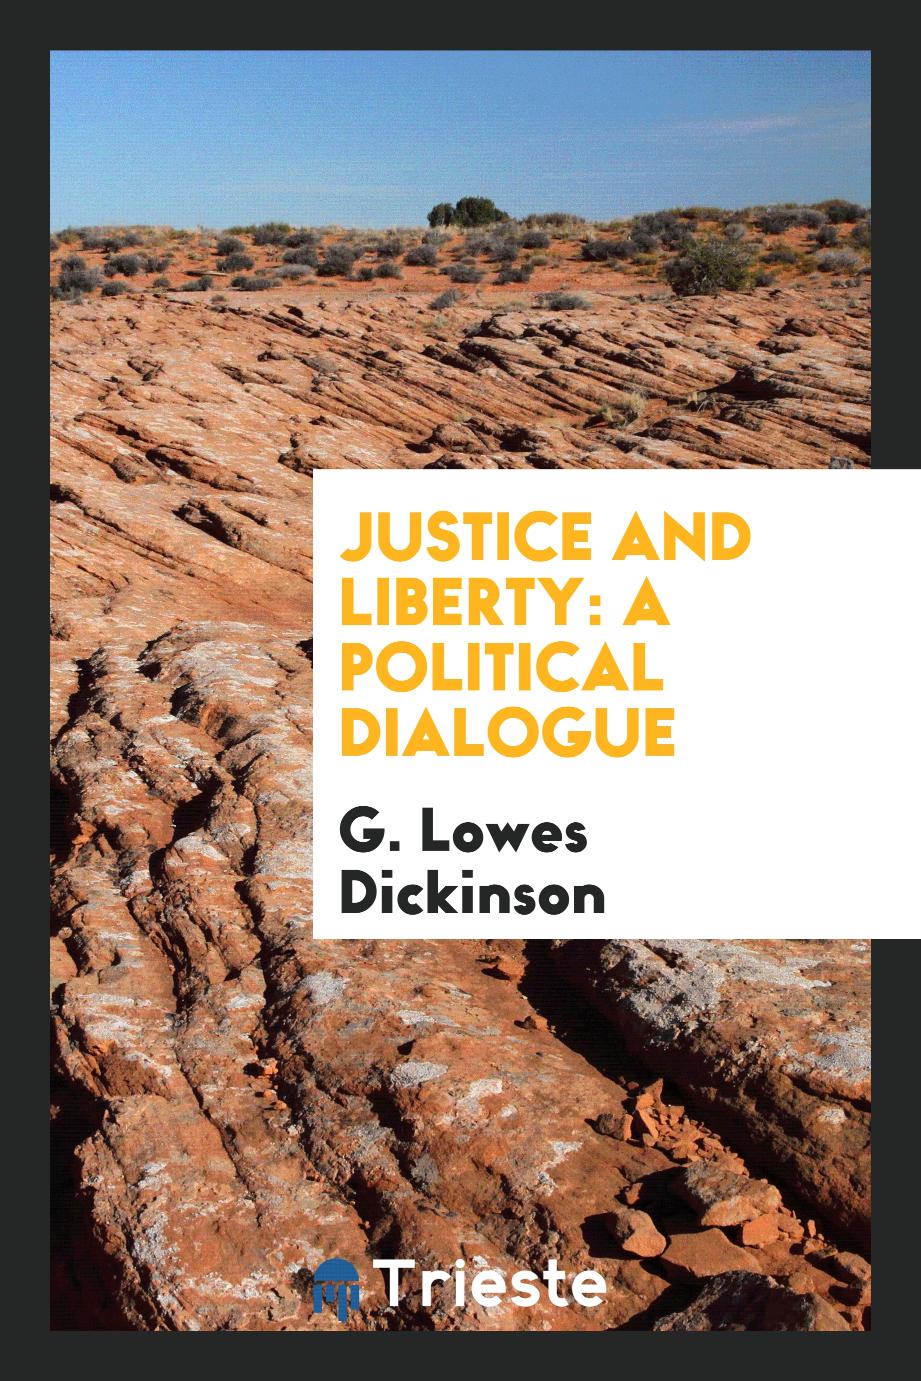 G. Lowes Dickinson - Justice and liberty: a political dialogue